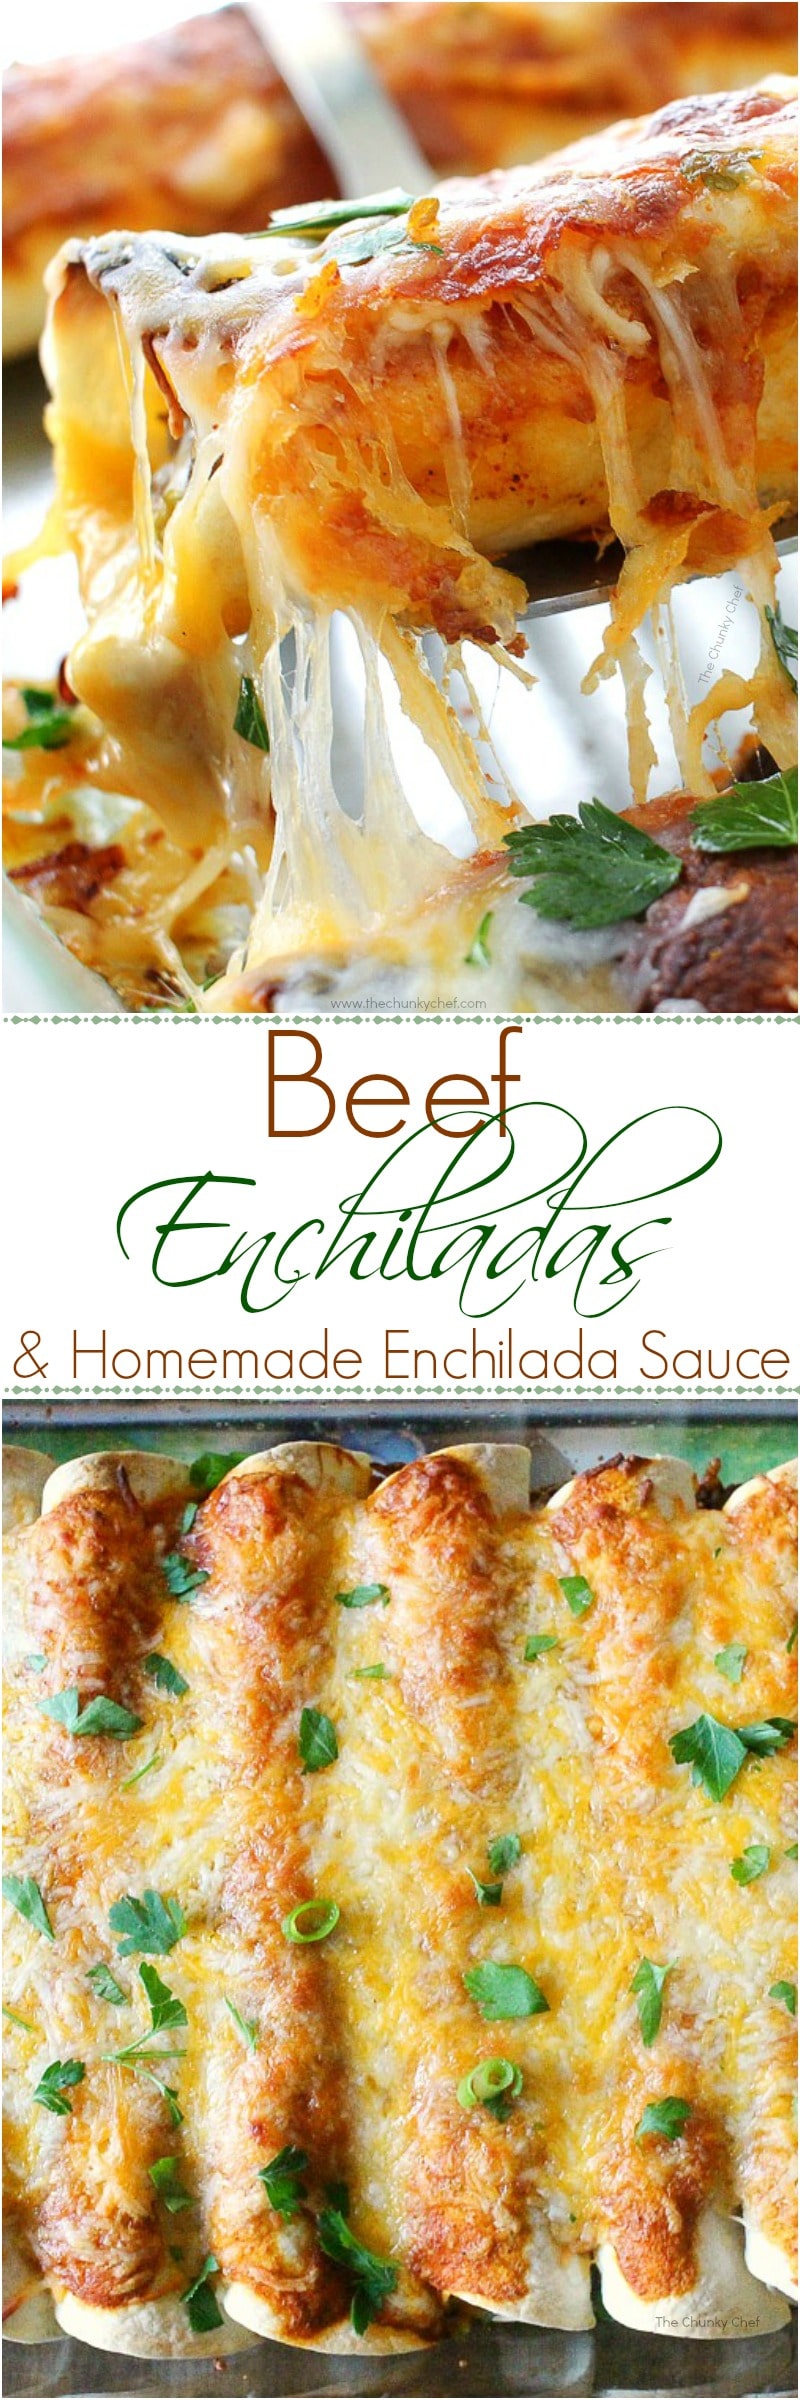 Beef Enchiladas with Homemade Enchilada Sauce - The Chunky Chef